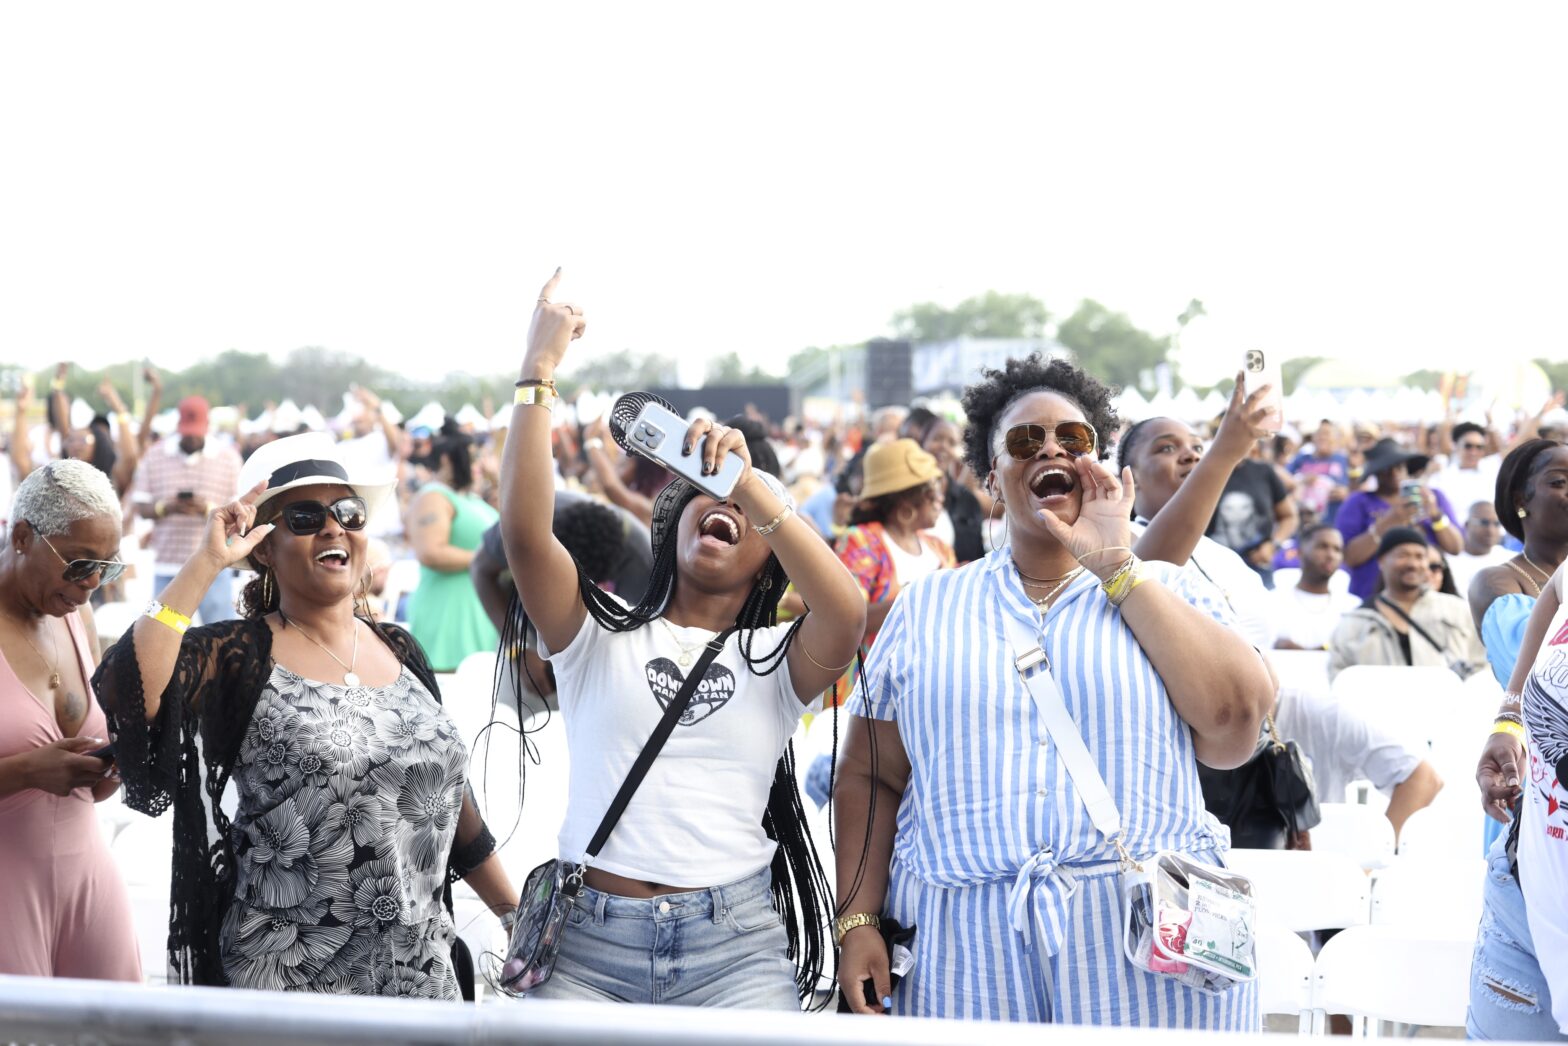 Jazz in the Gardens: Florida's Largest Black City Hosts 'Family Reunion' Style Music Festival